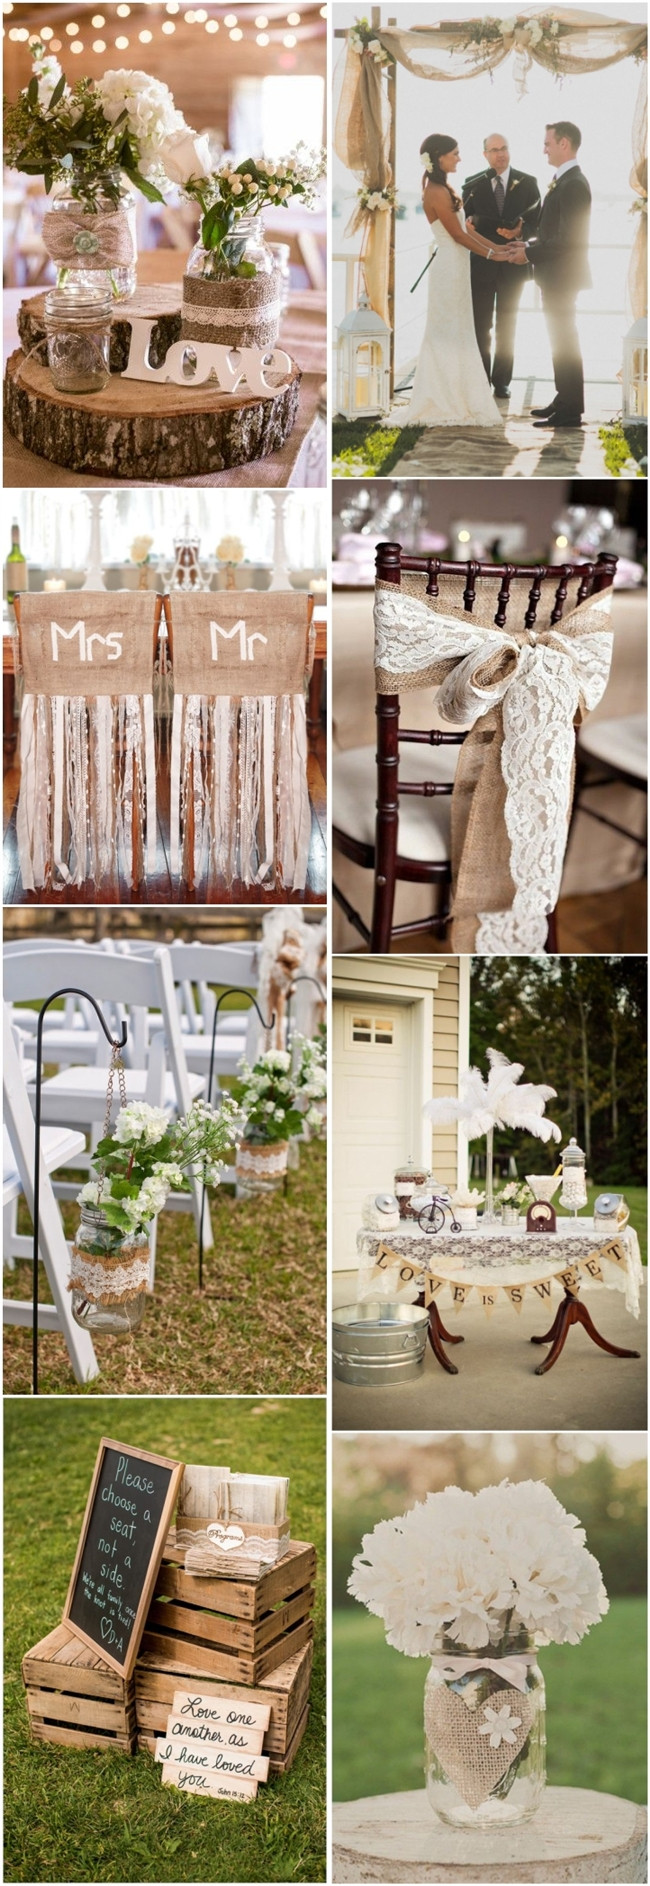 Country Themed Wedding Favors
 45 Chic Rustic Burlap & Lace Wedding Ideas and Inspiration